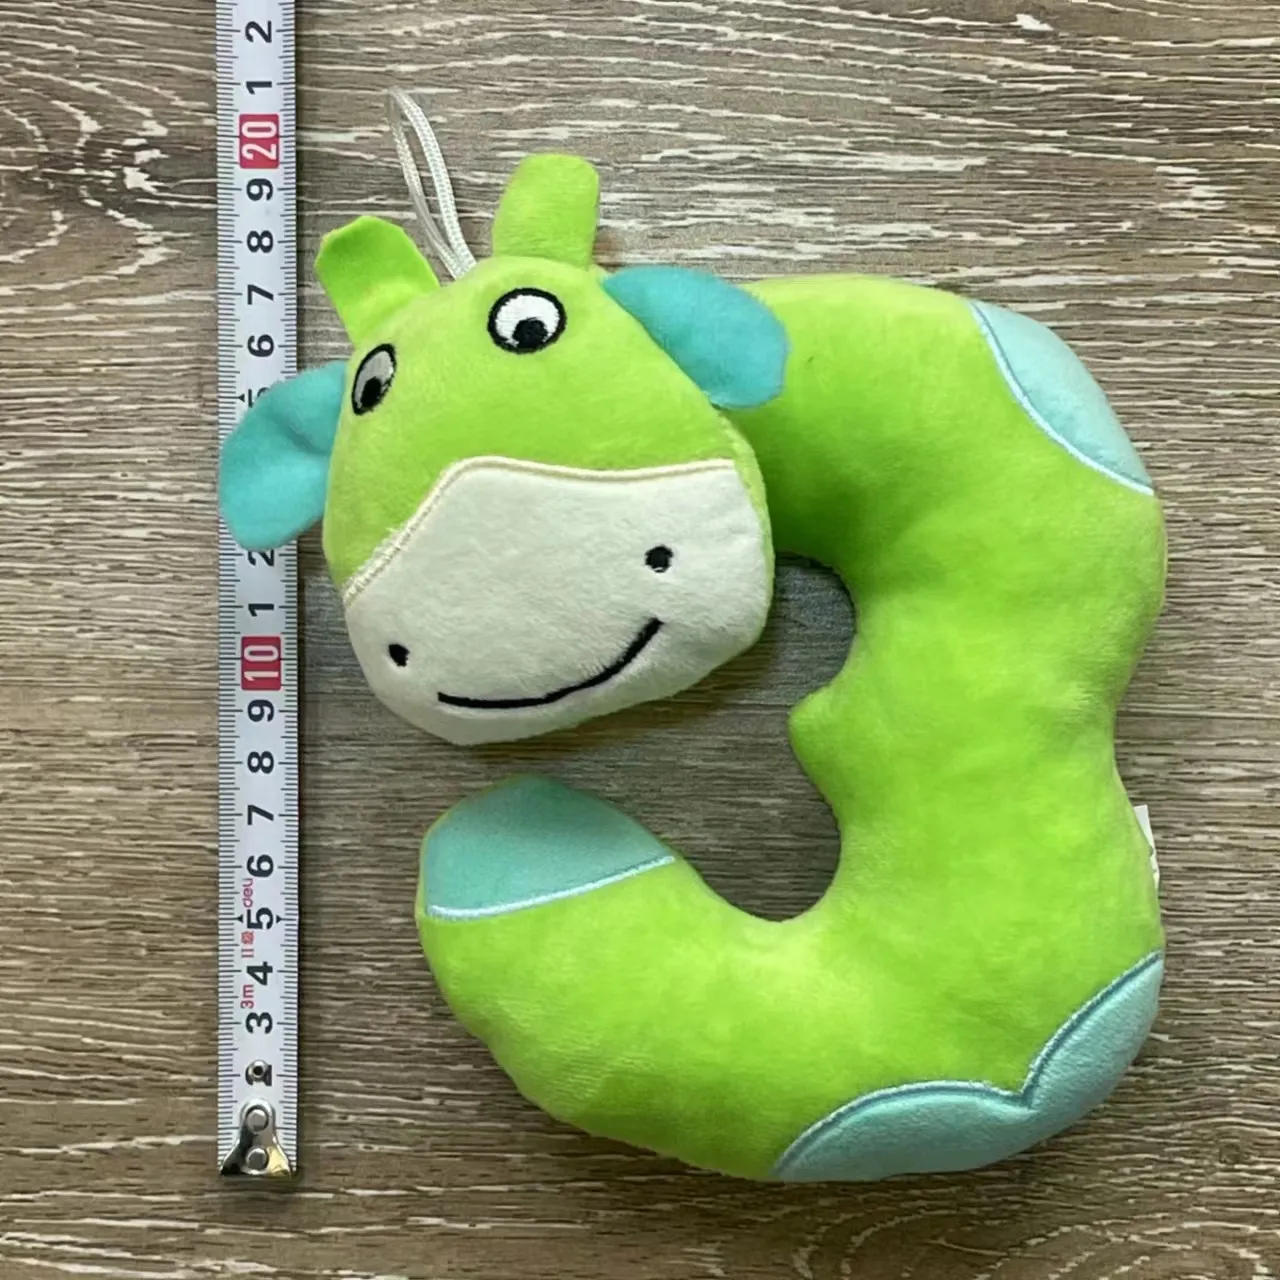 Fashion Creative Baby Soft Number Shape Animal Plush Counting Toys for Kids Education9505467